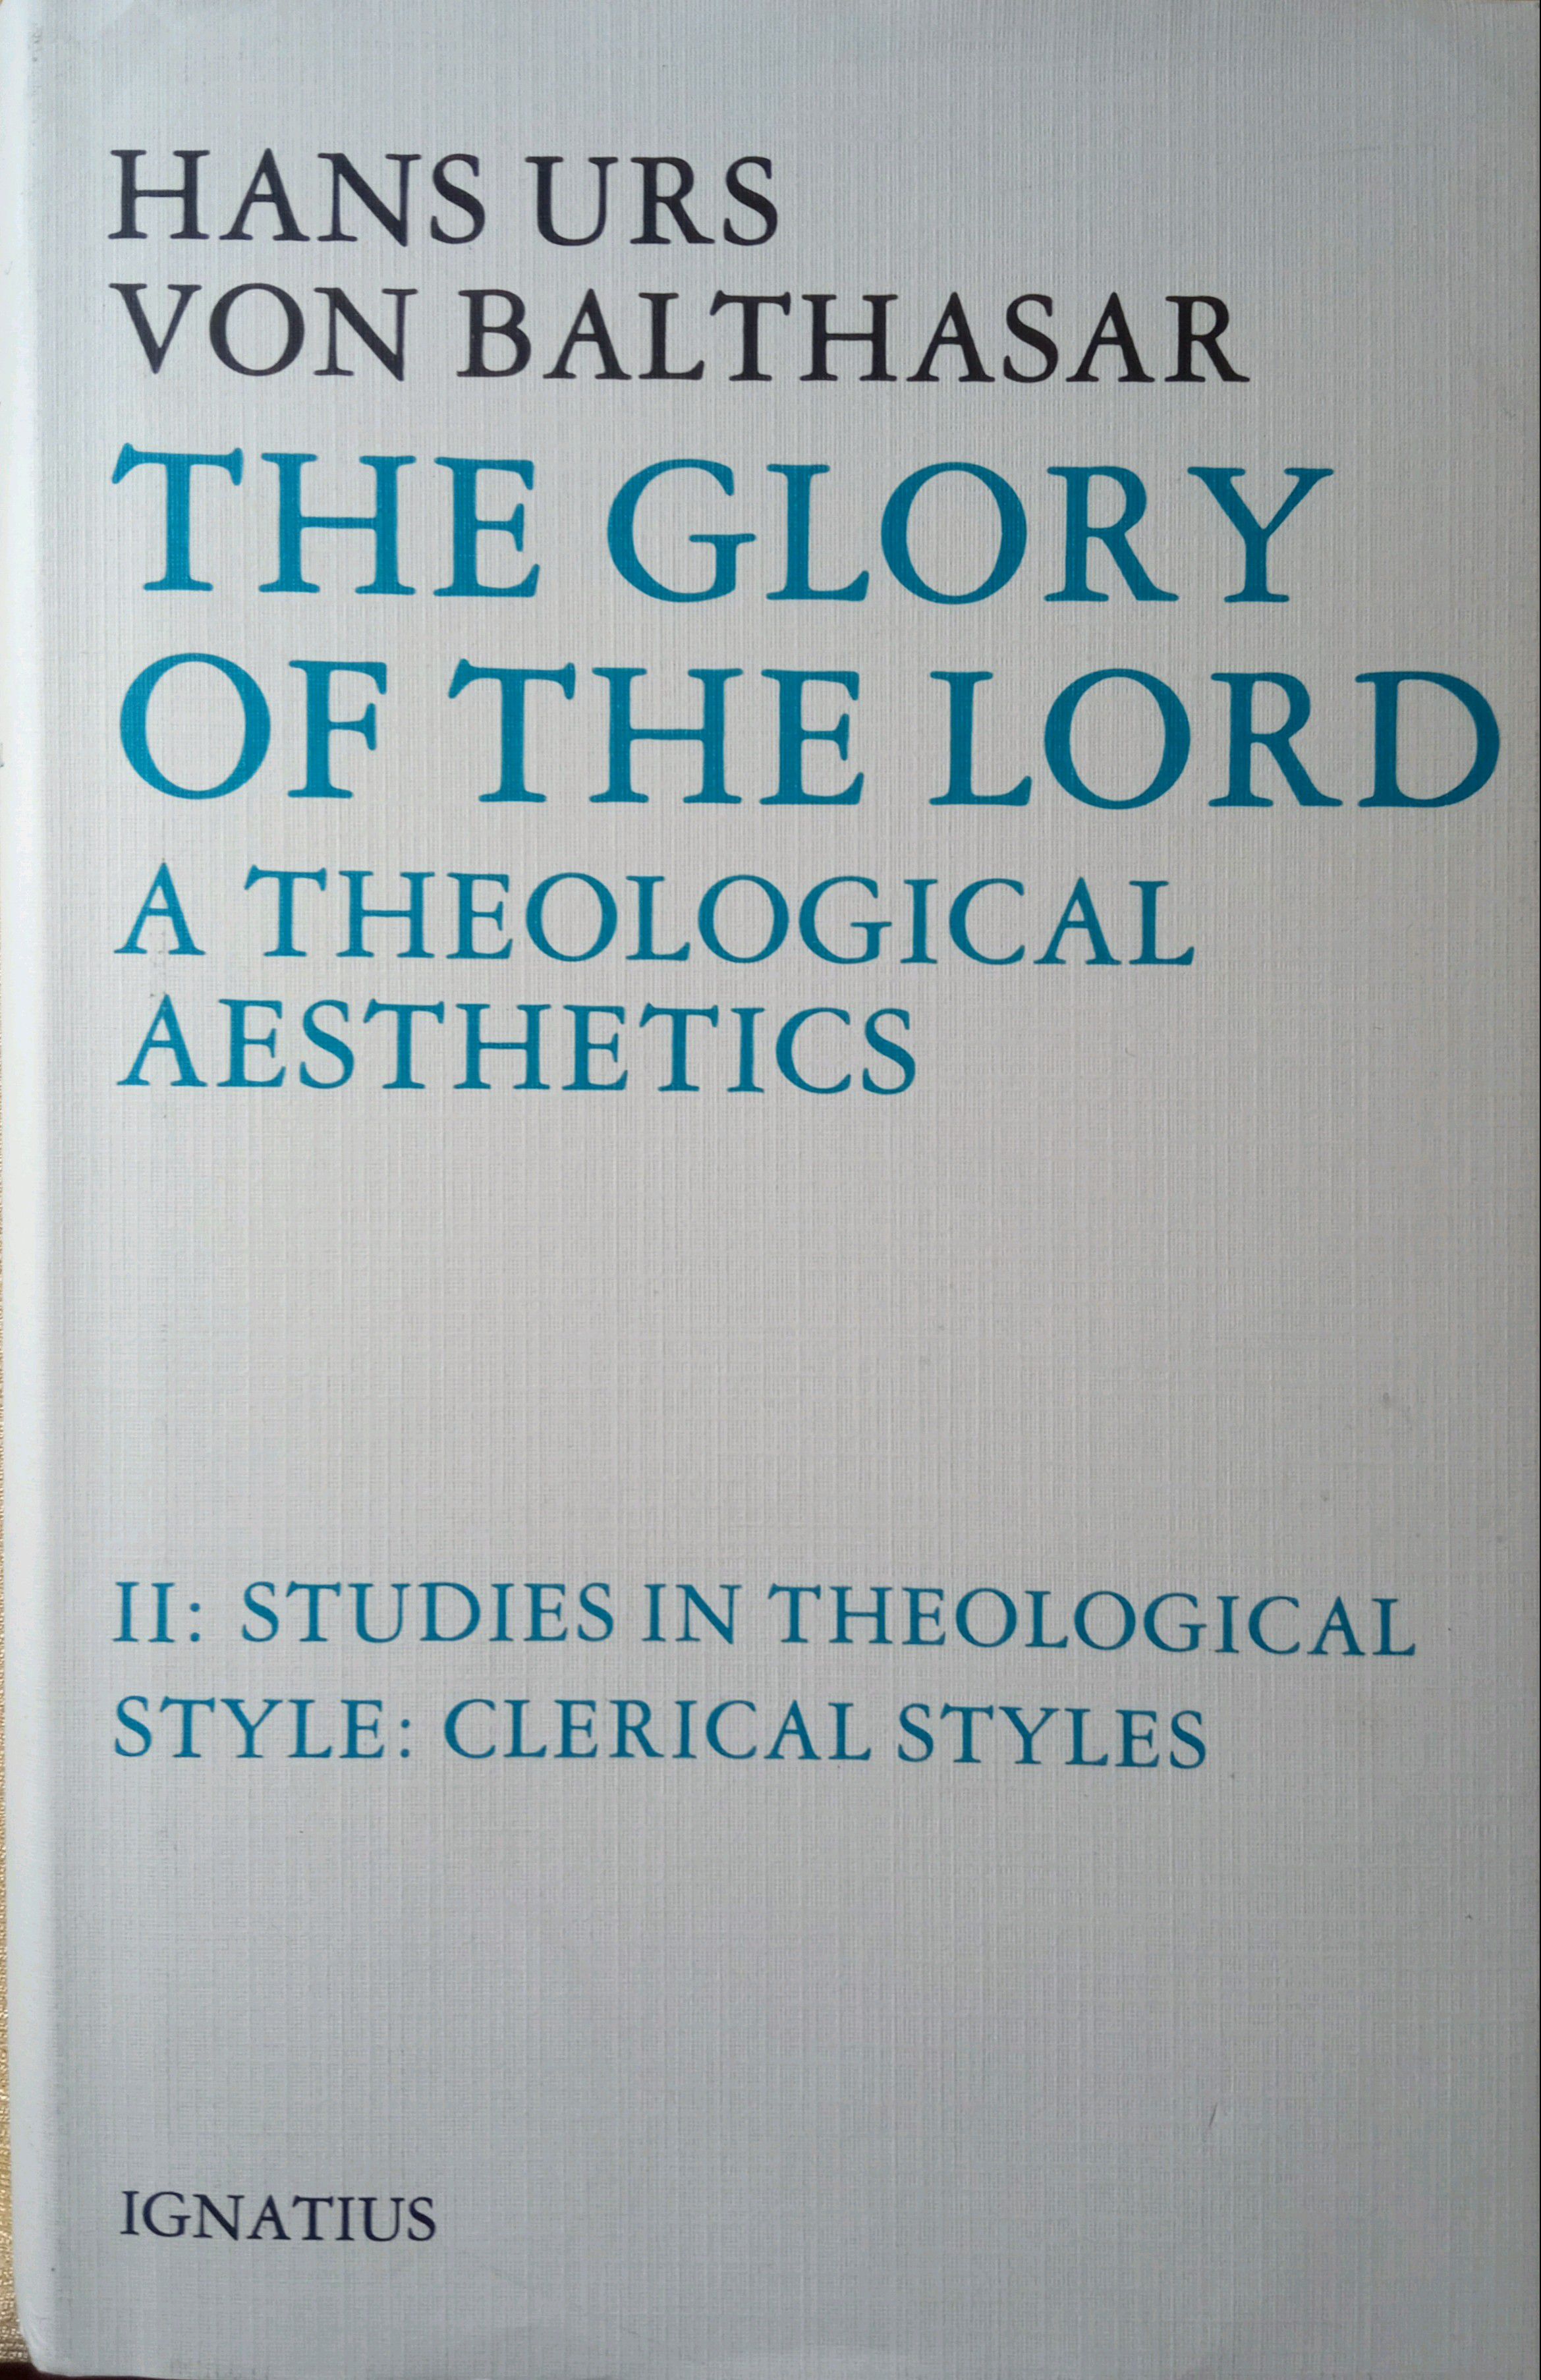 THE GLORY OF THE LORD: A THEOLOGICAL AESTHETICS. STUDIES IN THEOLOGICAL STYLE: CLERICAL STYLES